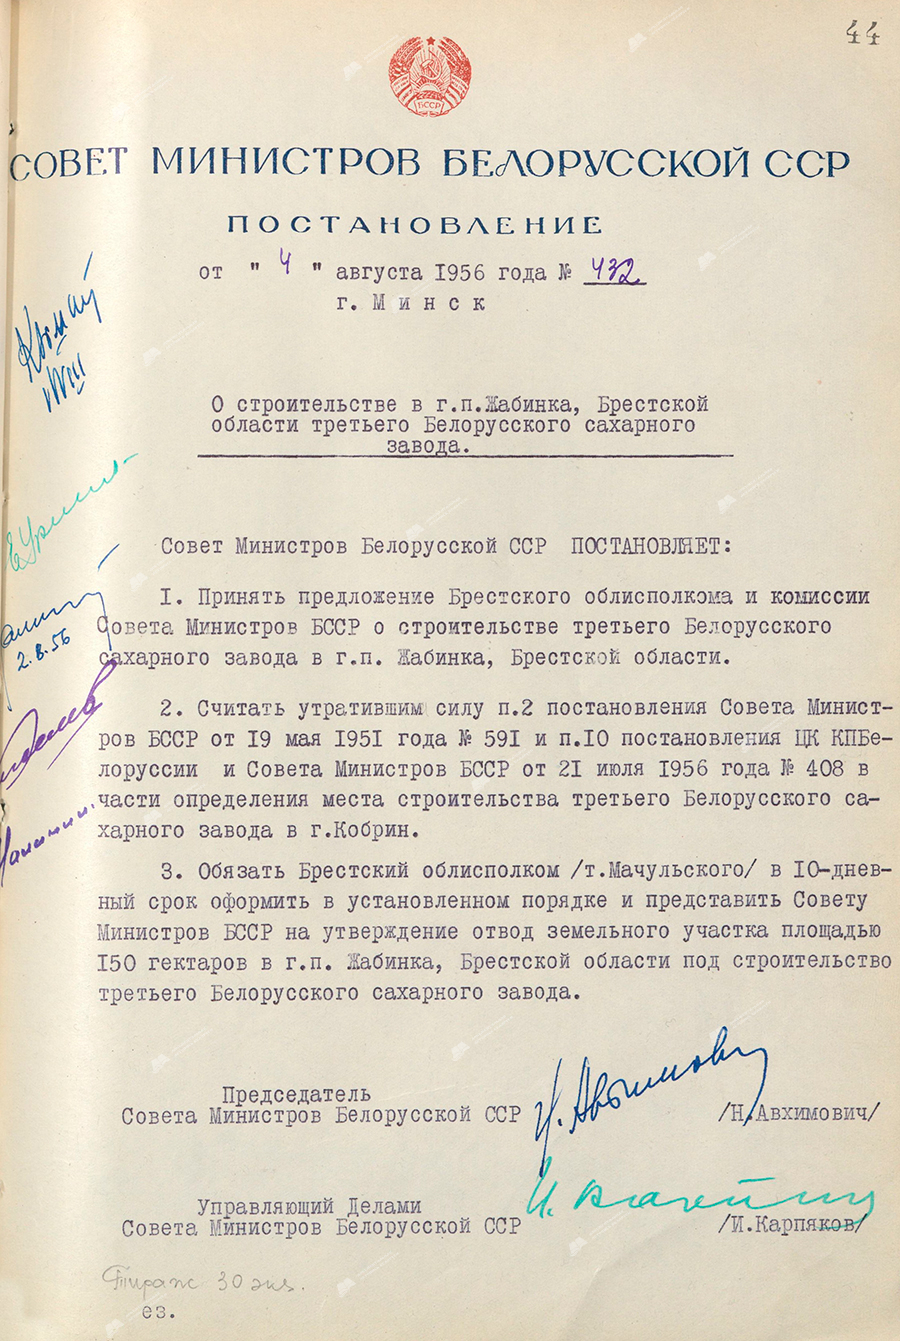 Resolution No. 432 of the Council of Ministers of the Byelorussian SSR «On construction in the urban settlement. Zhabinka, Brest region of the third Belarusian sugar factory»-с. 0